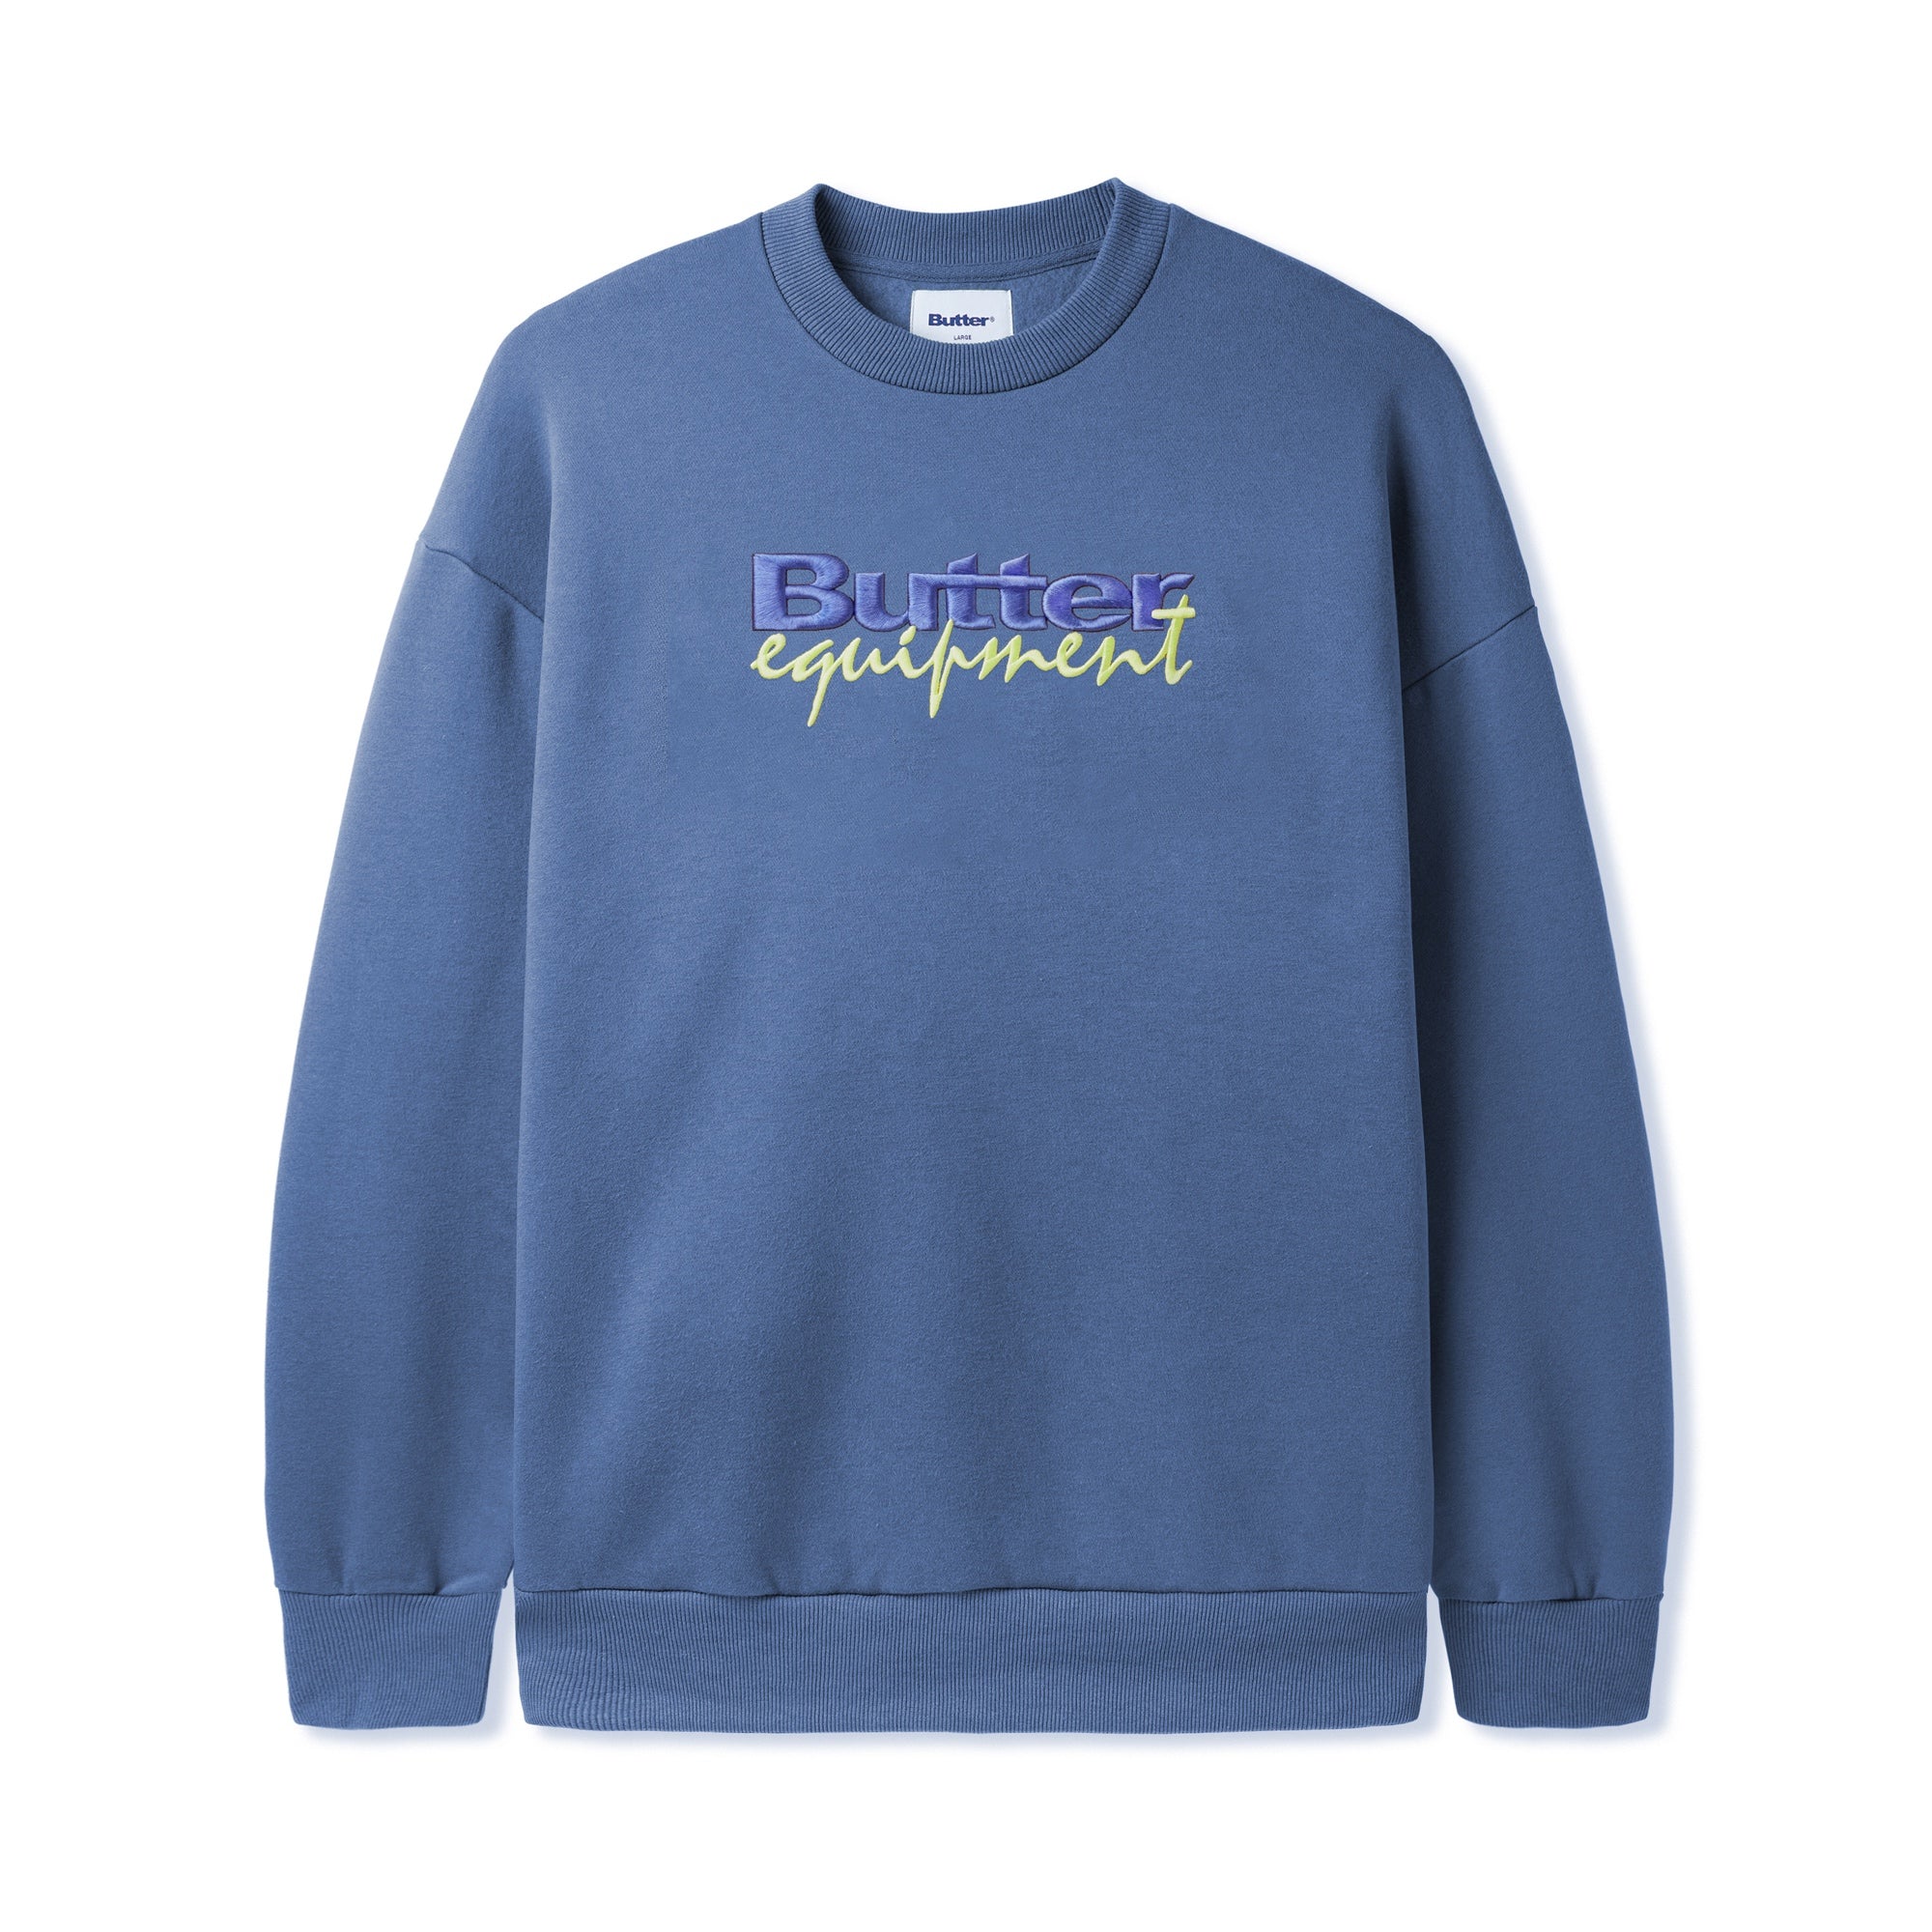 Equipment Embroidered Crewneck, Harbour Blue